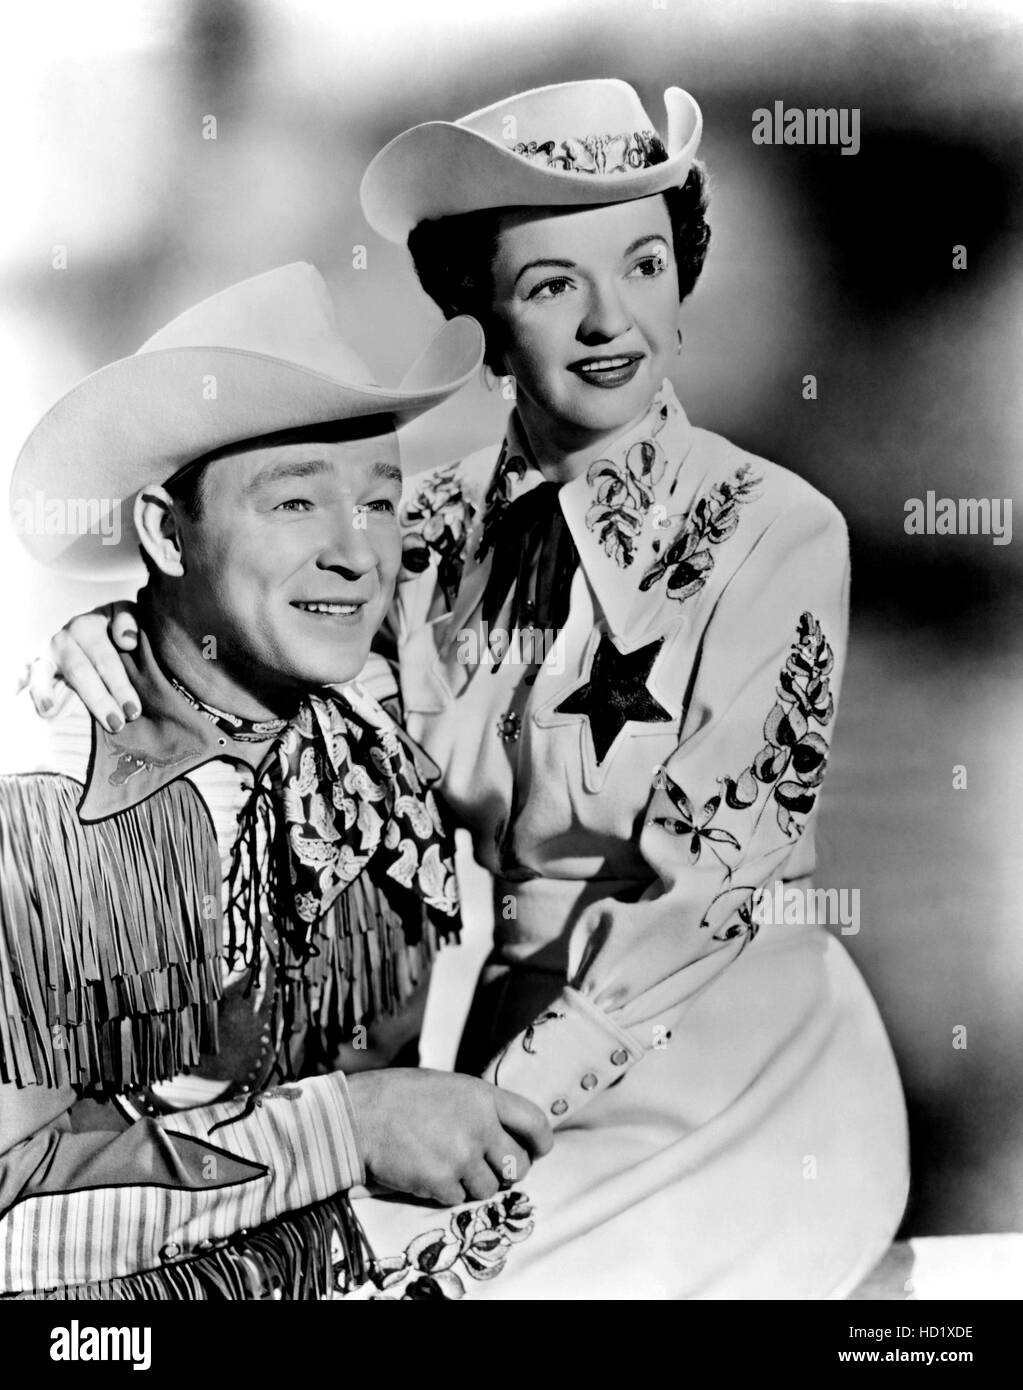 Roy Rogers, Dale Evans, late 1950s Stock Photo - Alamy